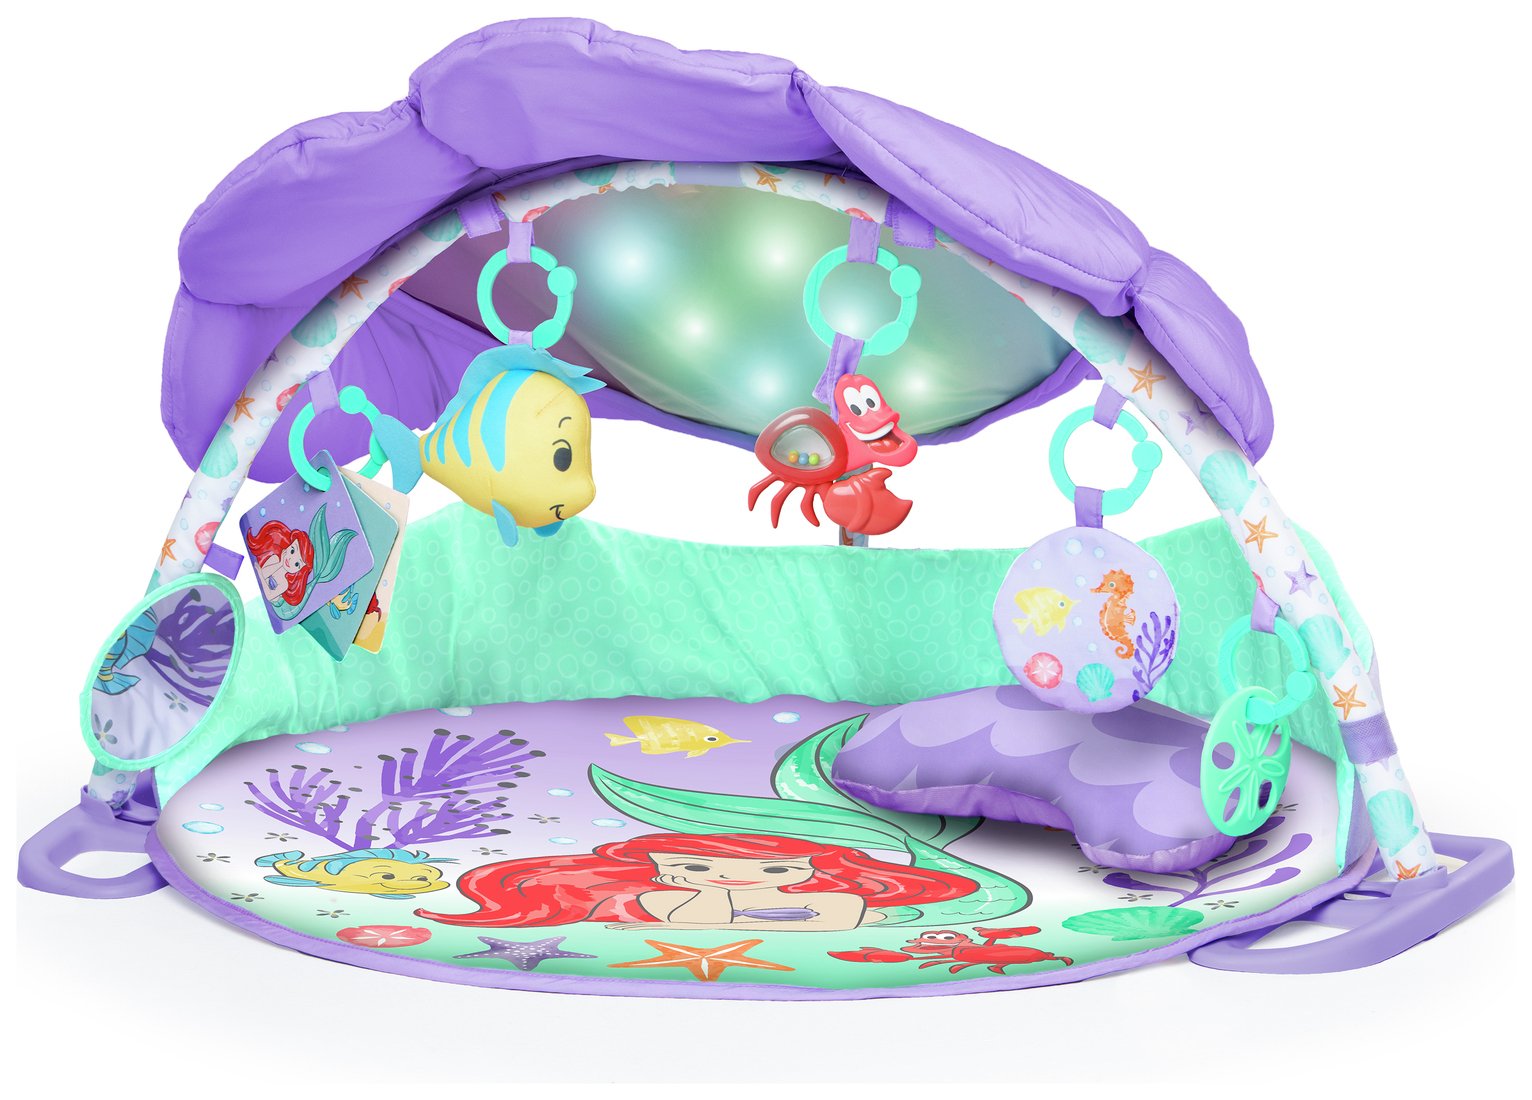 Bright Starts Little Mermaid Twinkle Trove Activity Gym